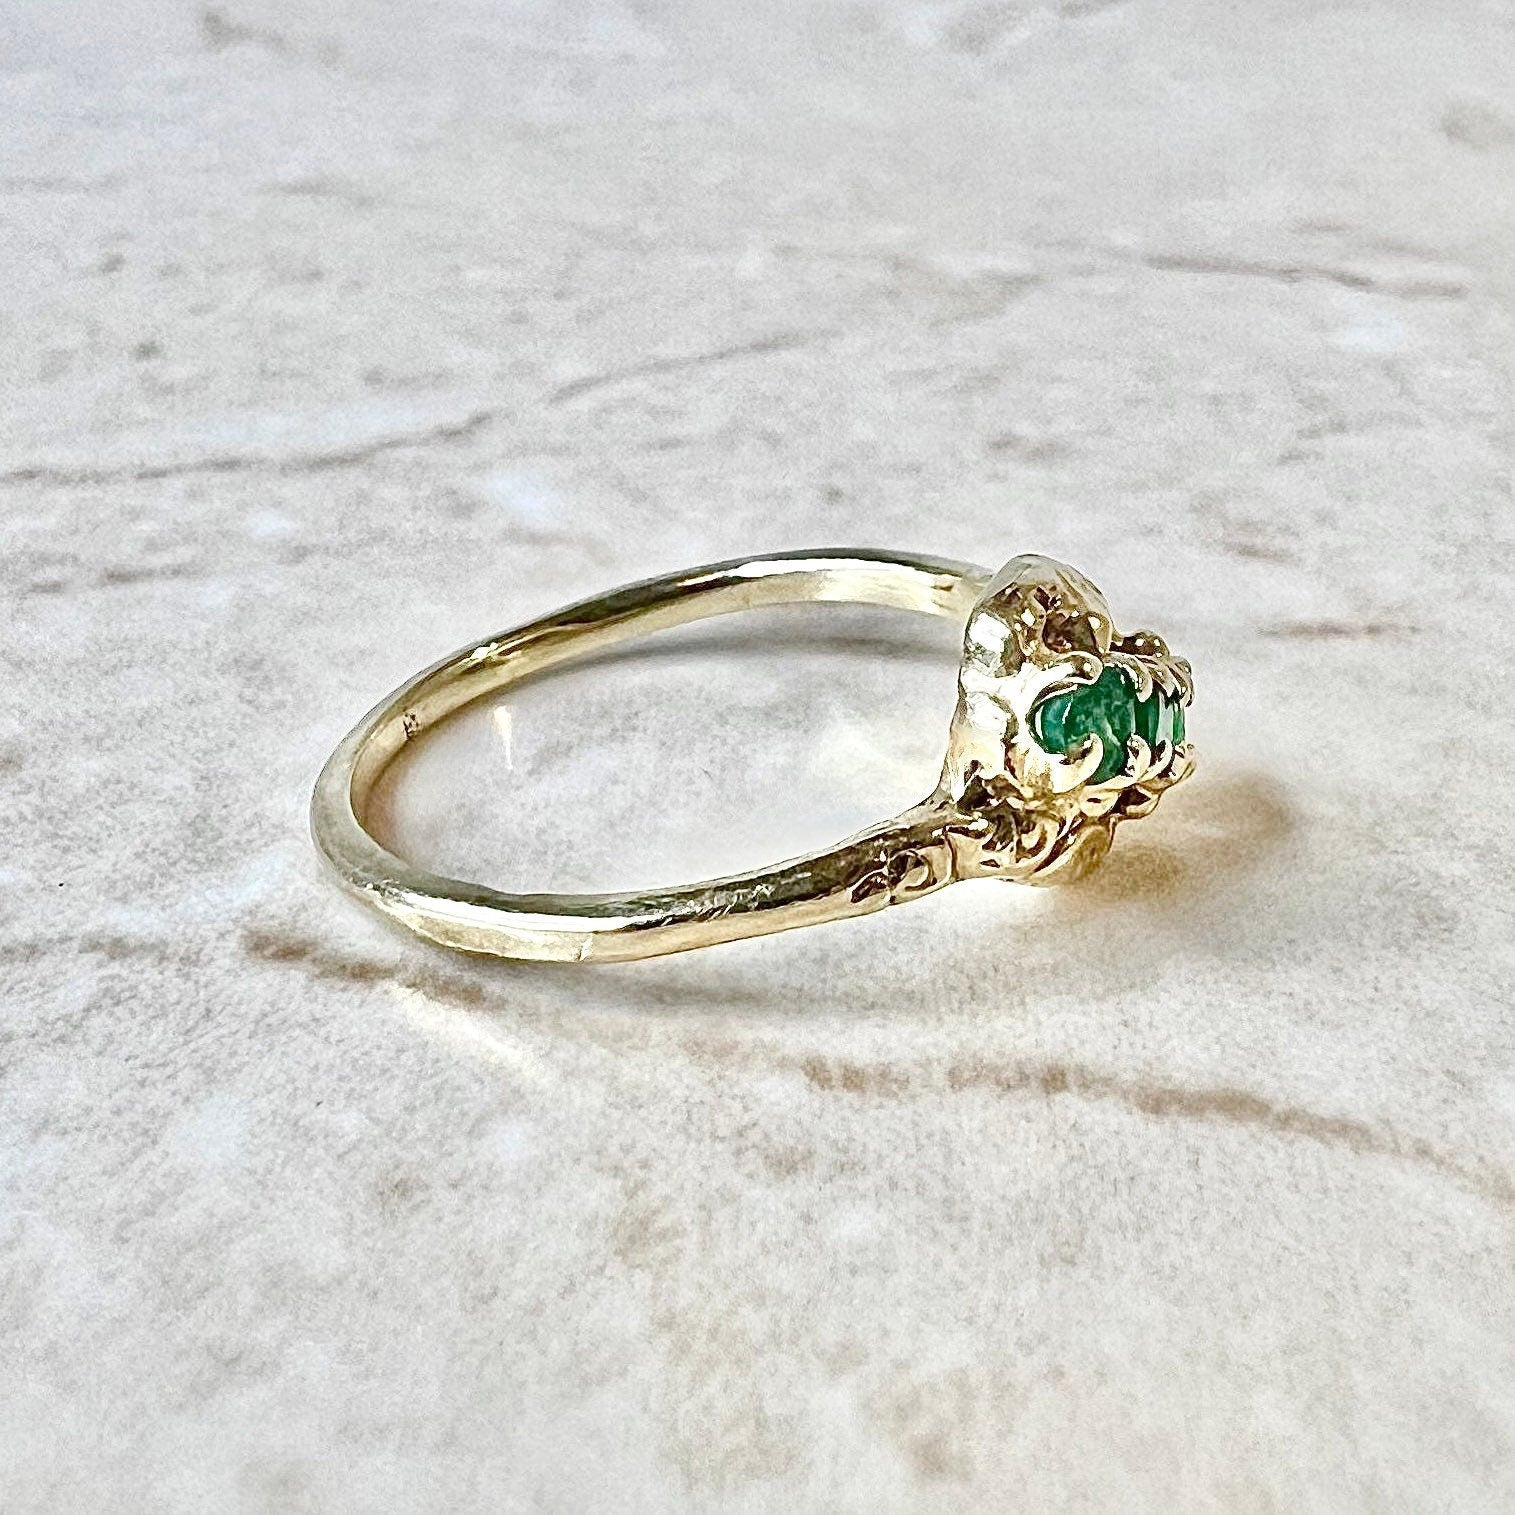 Antique 14 Karat Yellow Gold Natural Emerald Ring - Emerald Cocktail Ring - Three Stone Emerald Ring - May Birthstone - Best Gifts For Her